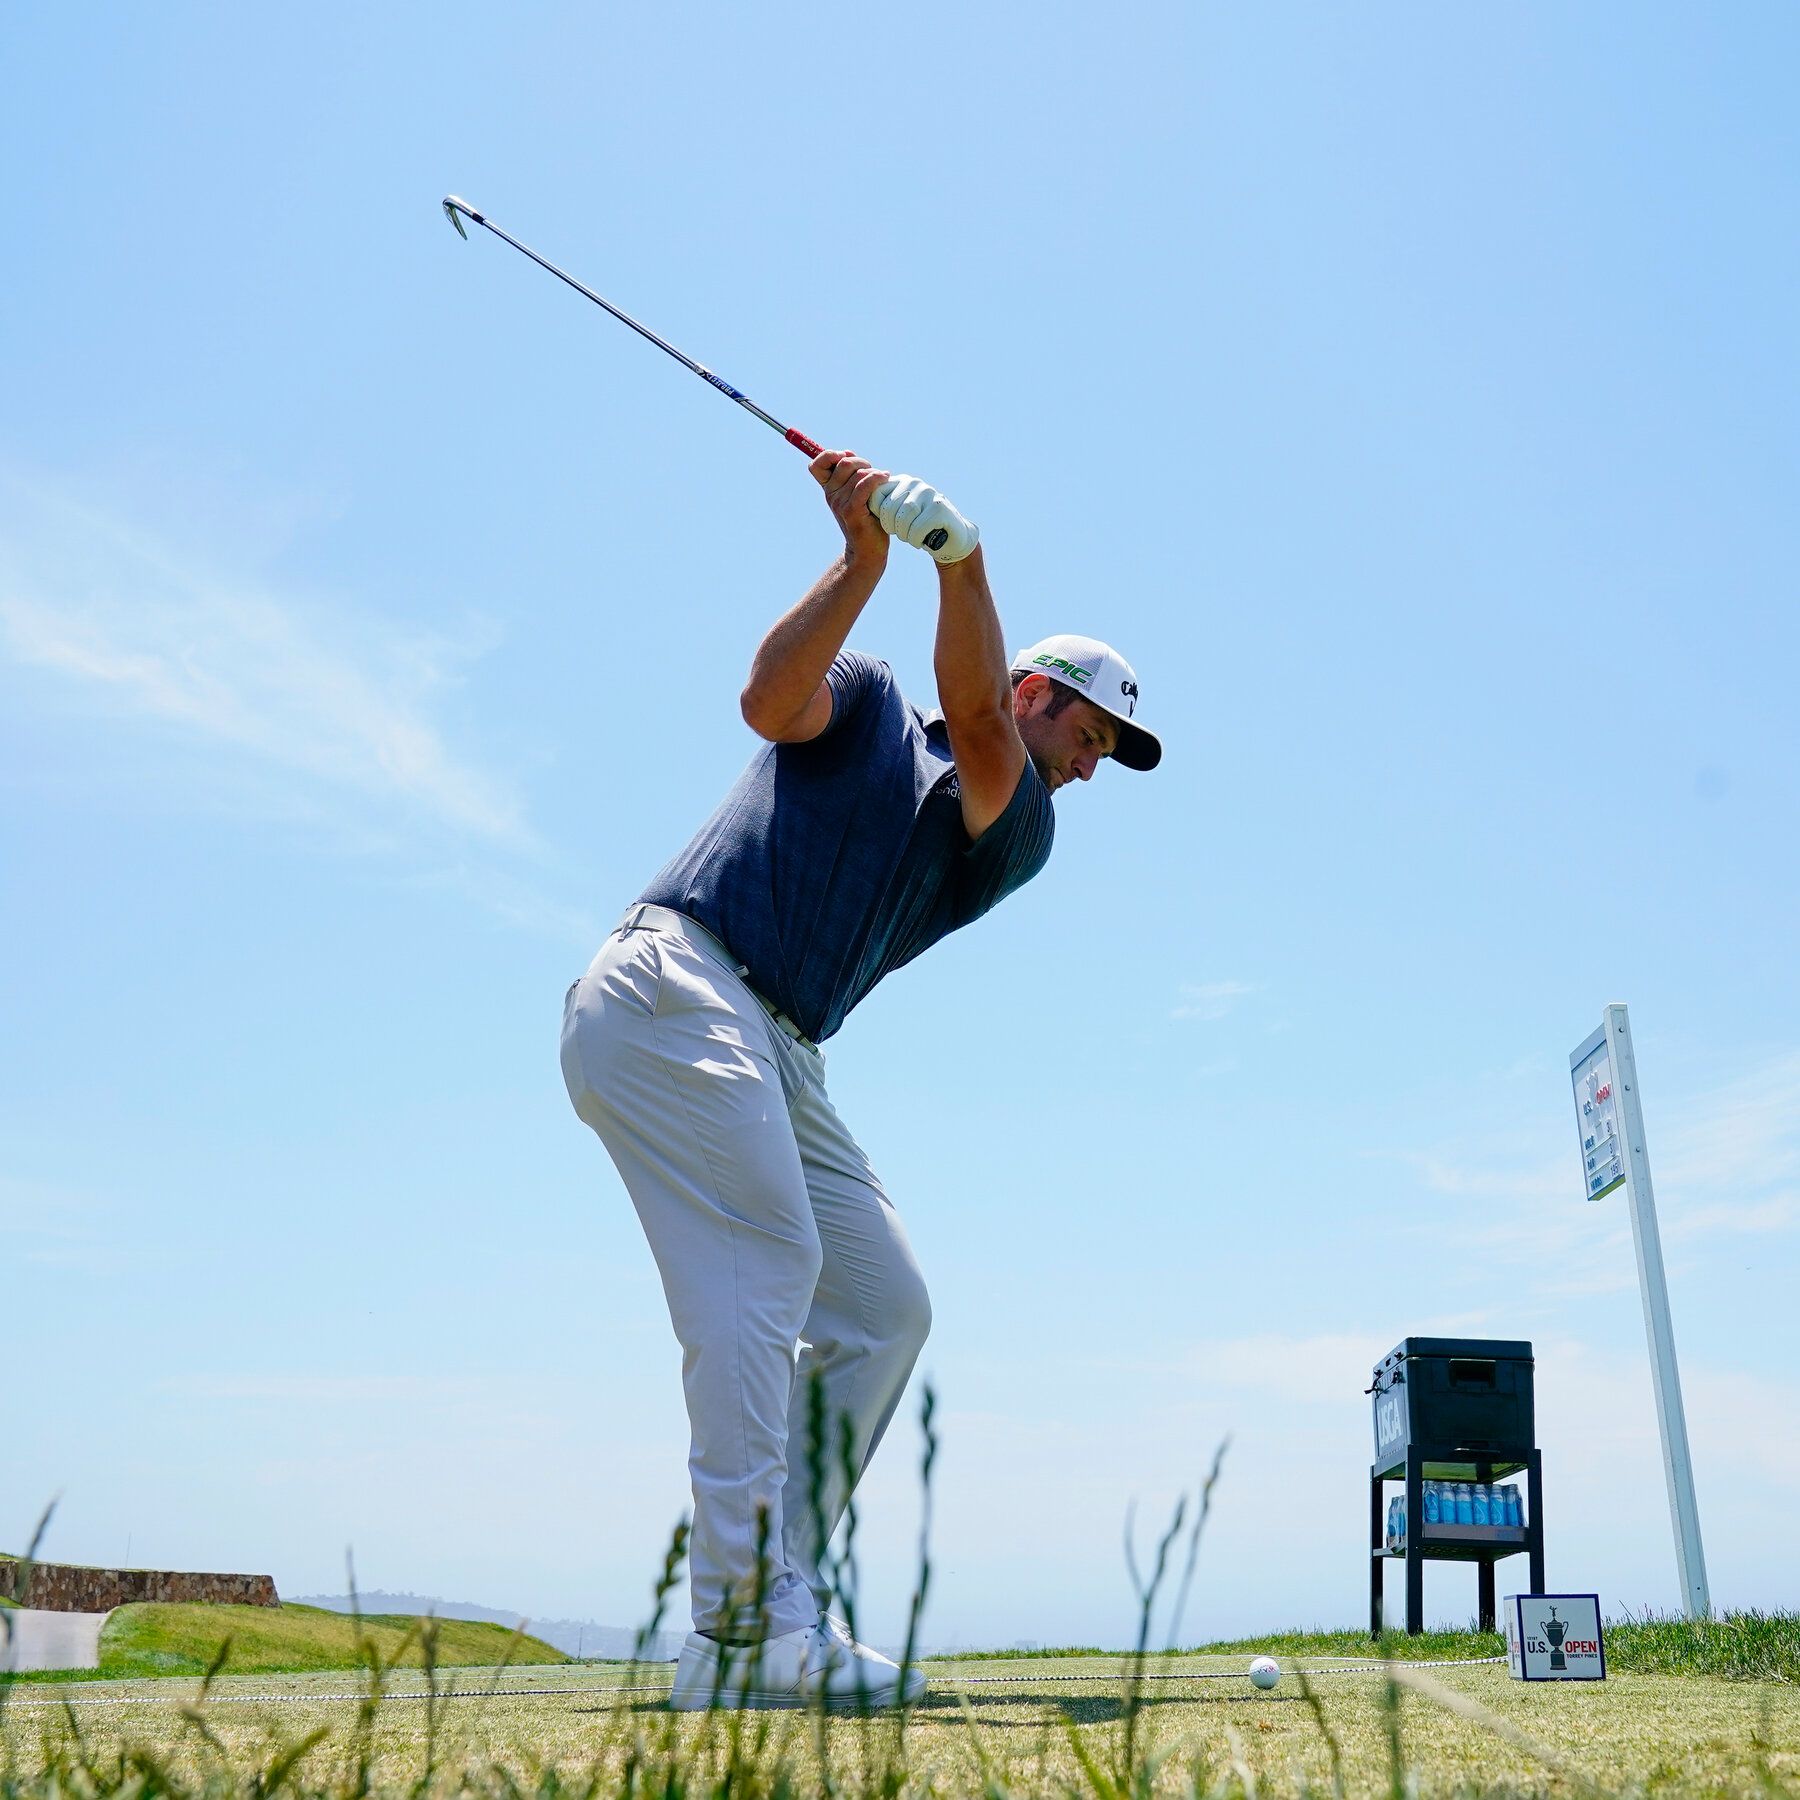 After testing positive, the golfer Jon Rahm will return to play at the U.S. Open